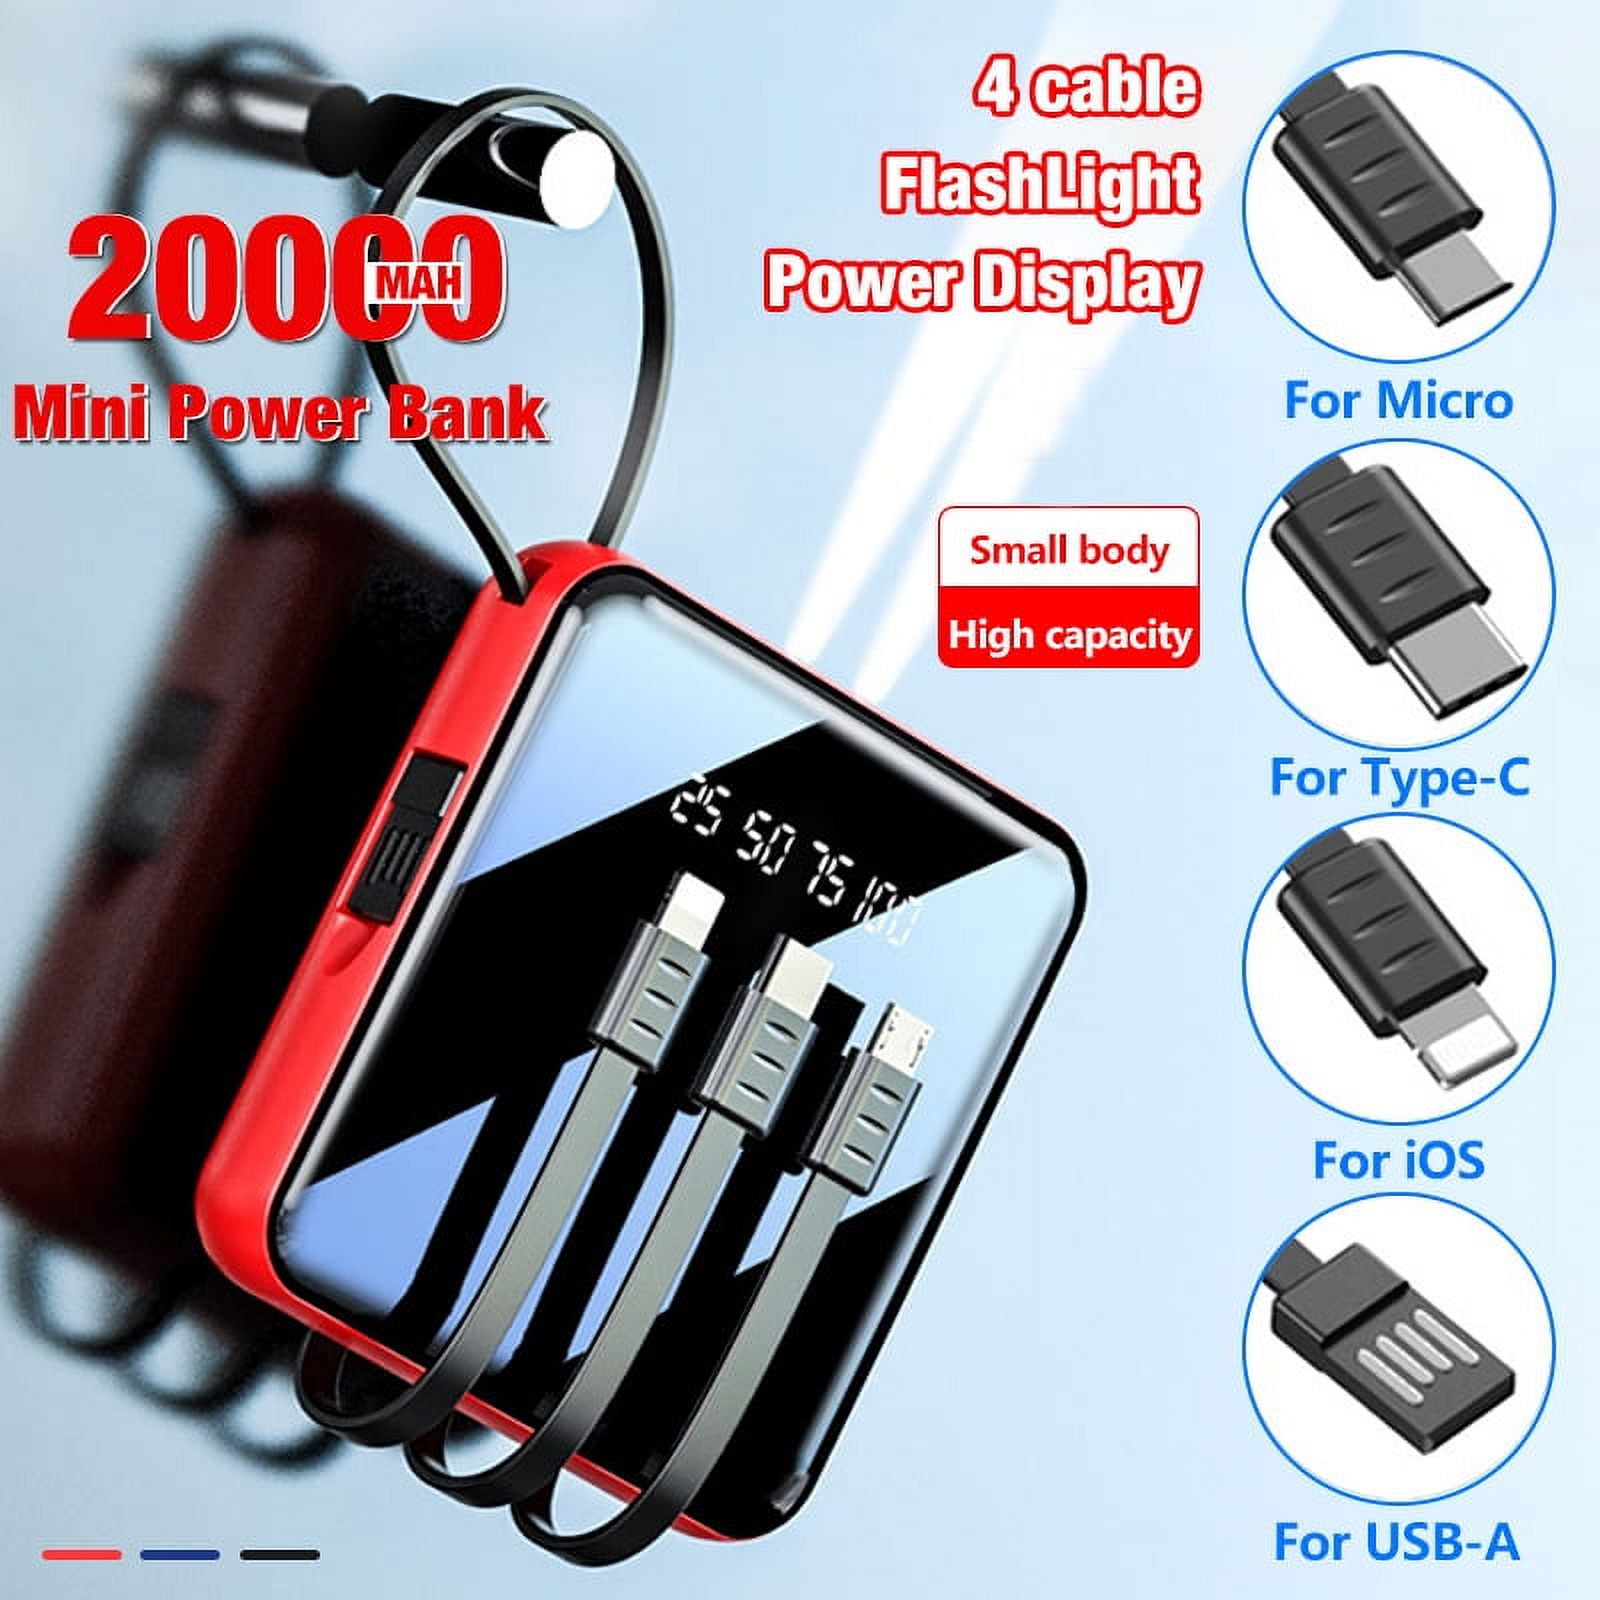 4 in 1 Power Bank, 20000mAh Portable Charger Mini Power Bank for  iOS/Micro/type-c/USB-A, Black 